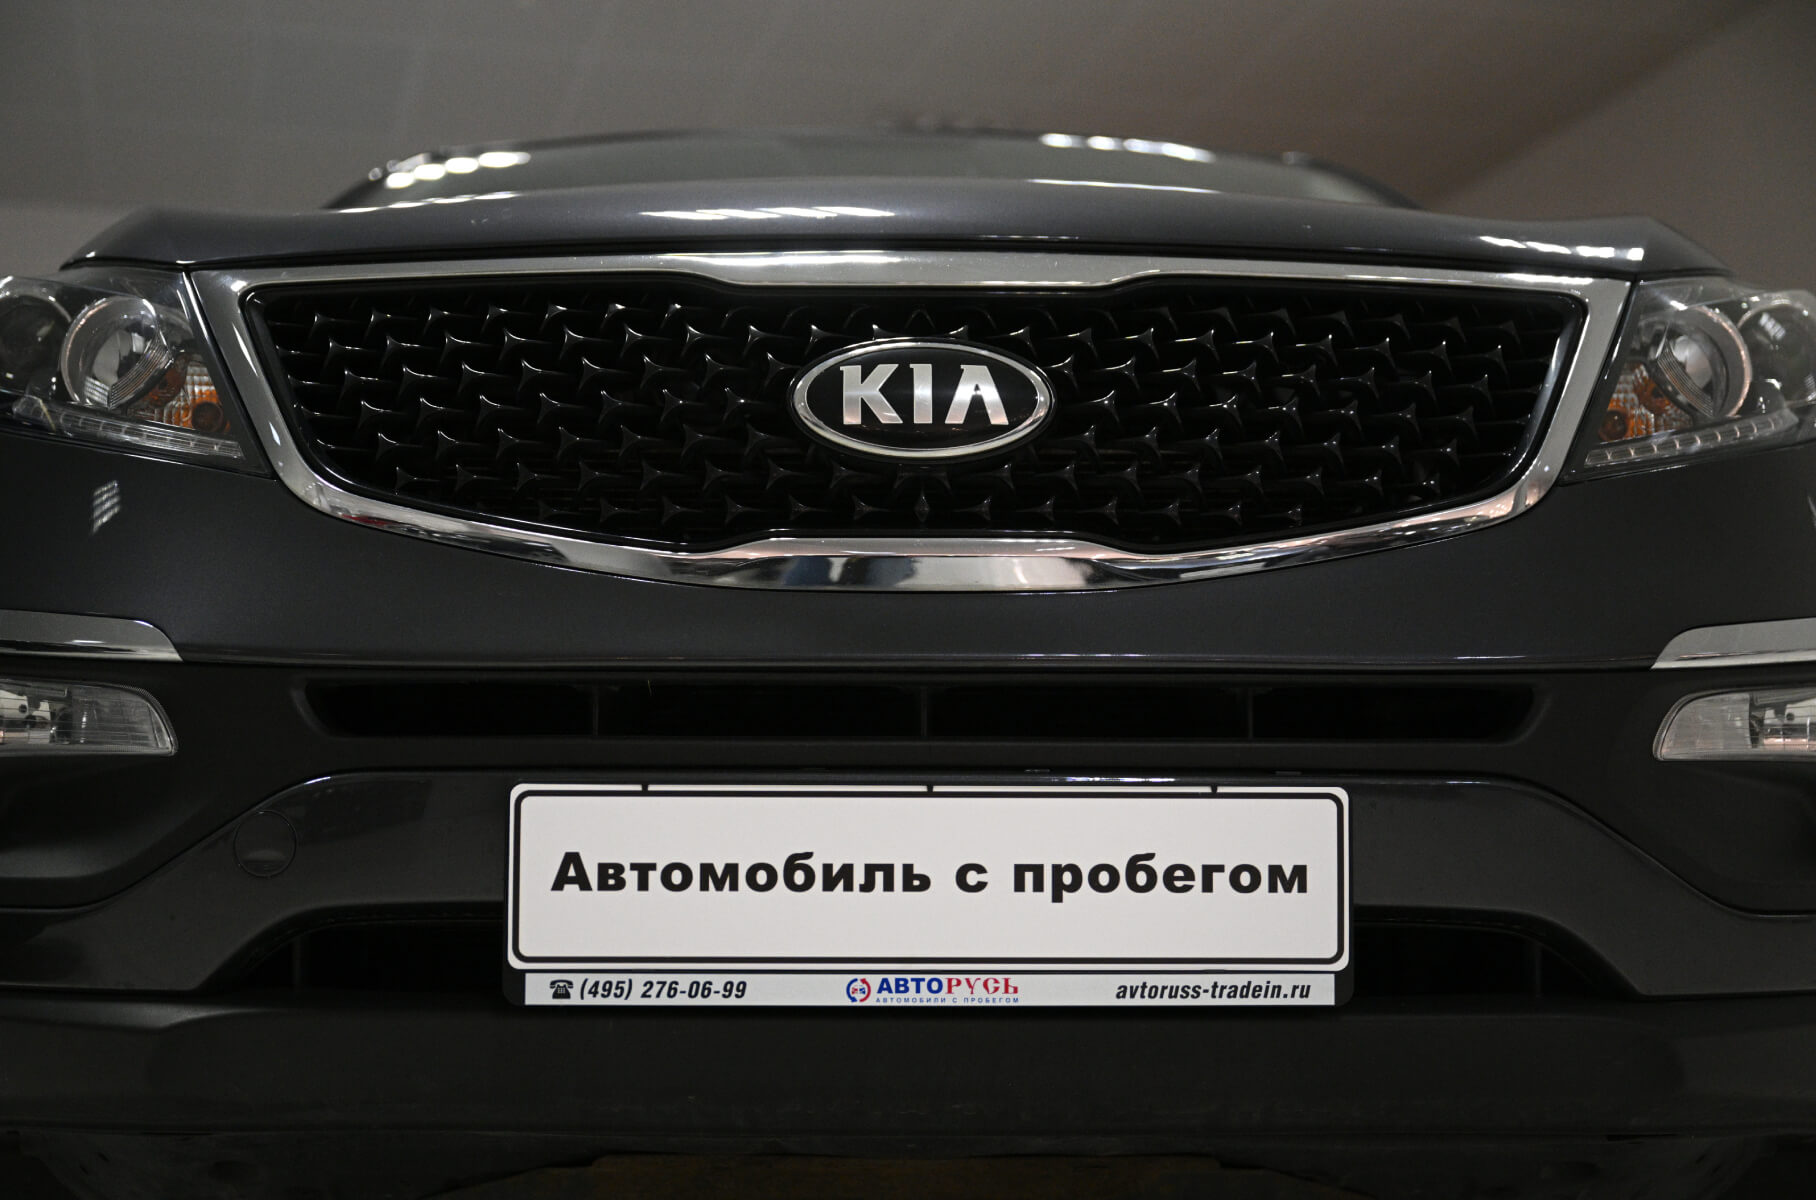 The most popular cars on the Russian secondary market have been named